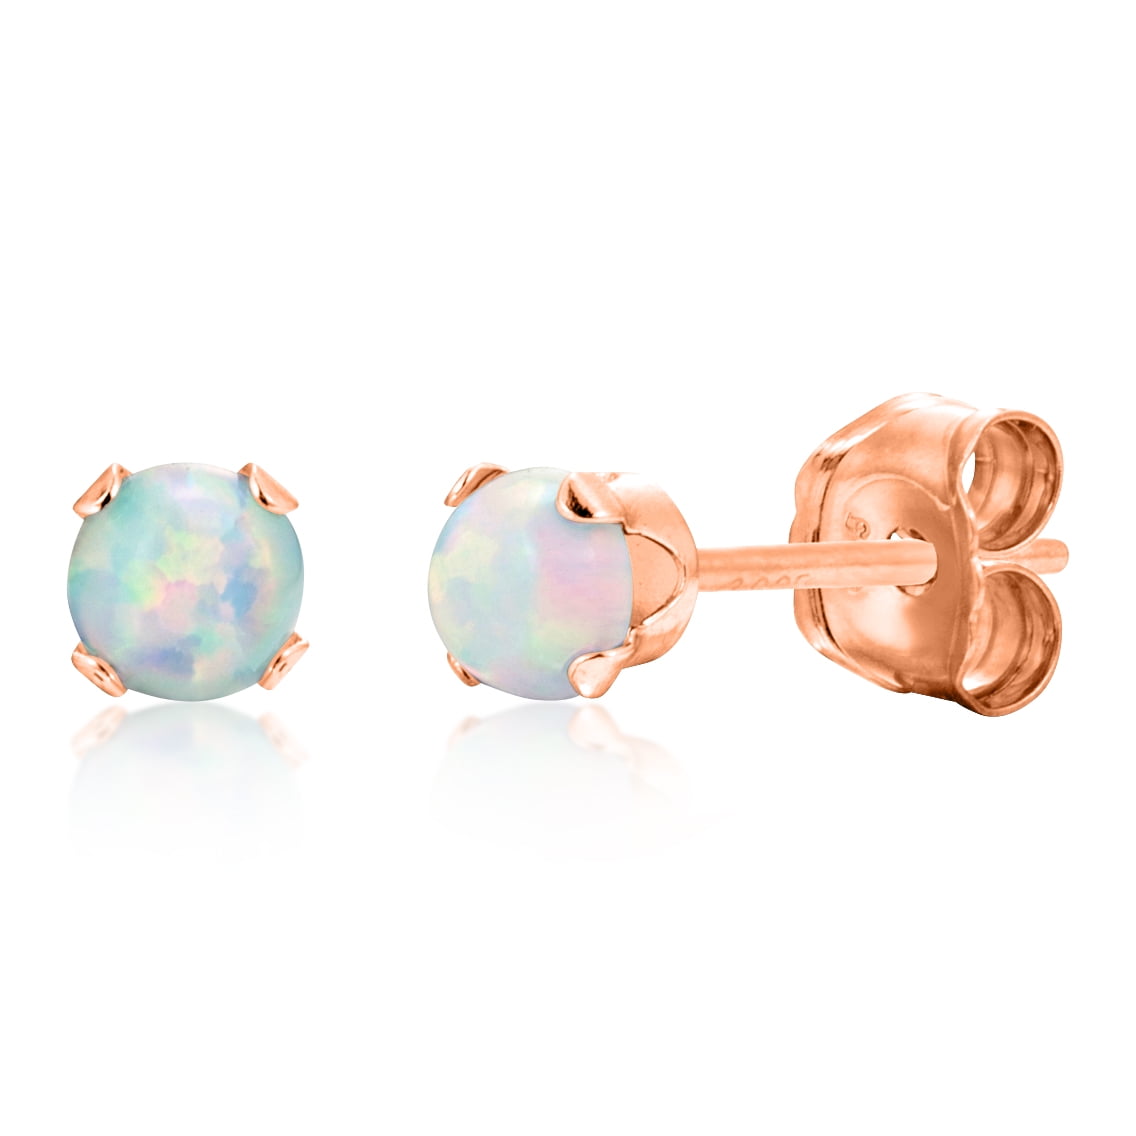 Round 3mm Fire &amp; Snow White Simulated Opal Stud Earrings - Rose Gold Over Sterling Silver .925